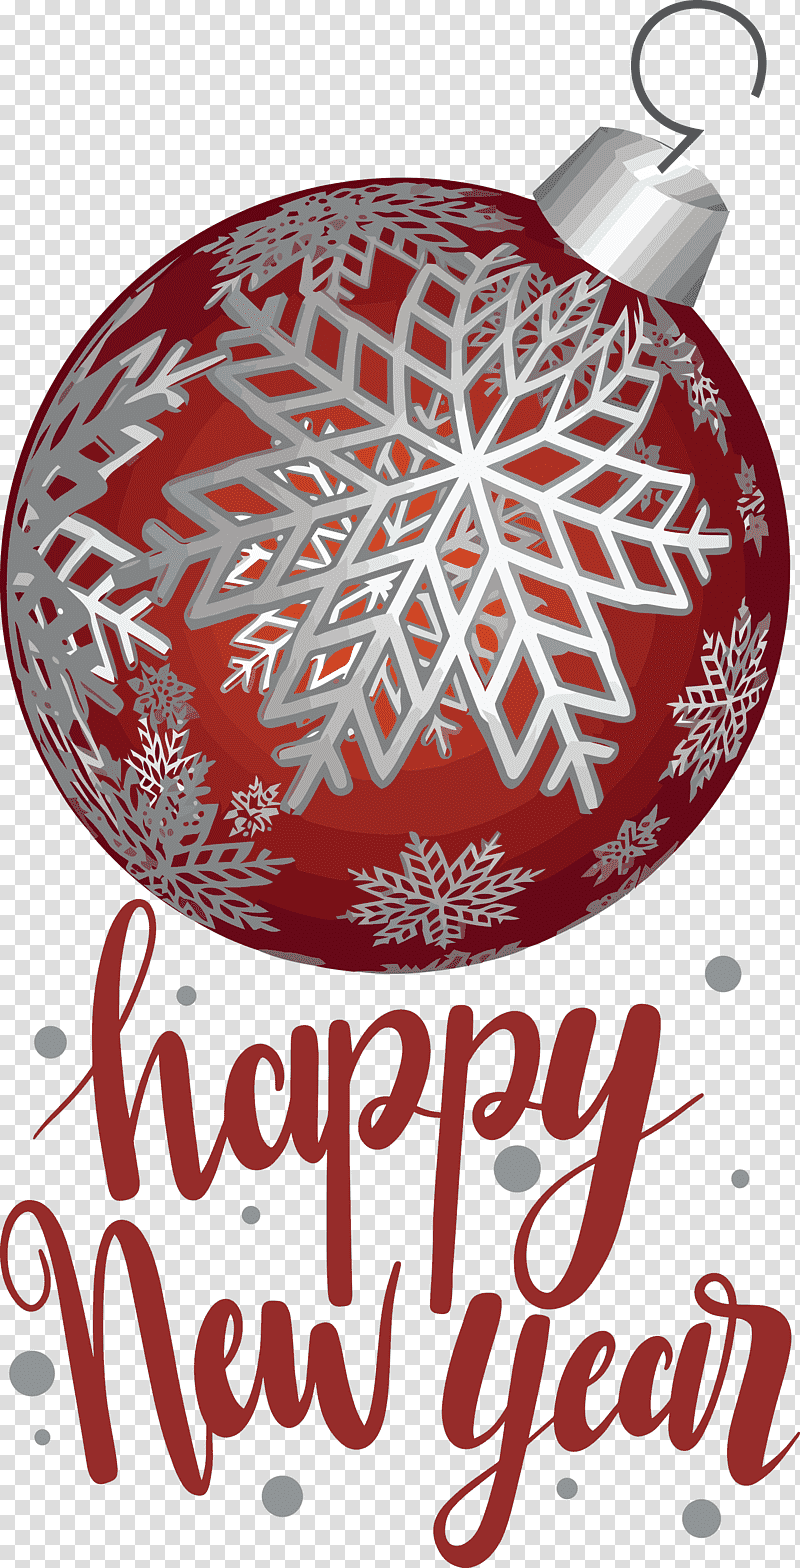 2021 Happy New Year 2021 New Year Happy New Year, New Years Day, New Years Eve, Holiday, Chinese New Year, Islamic New Year, Christmas Ornament transparent background PNG clipart